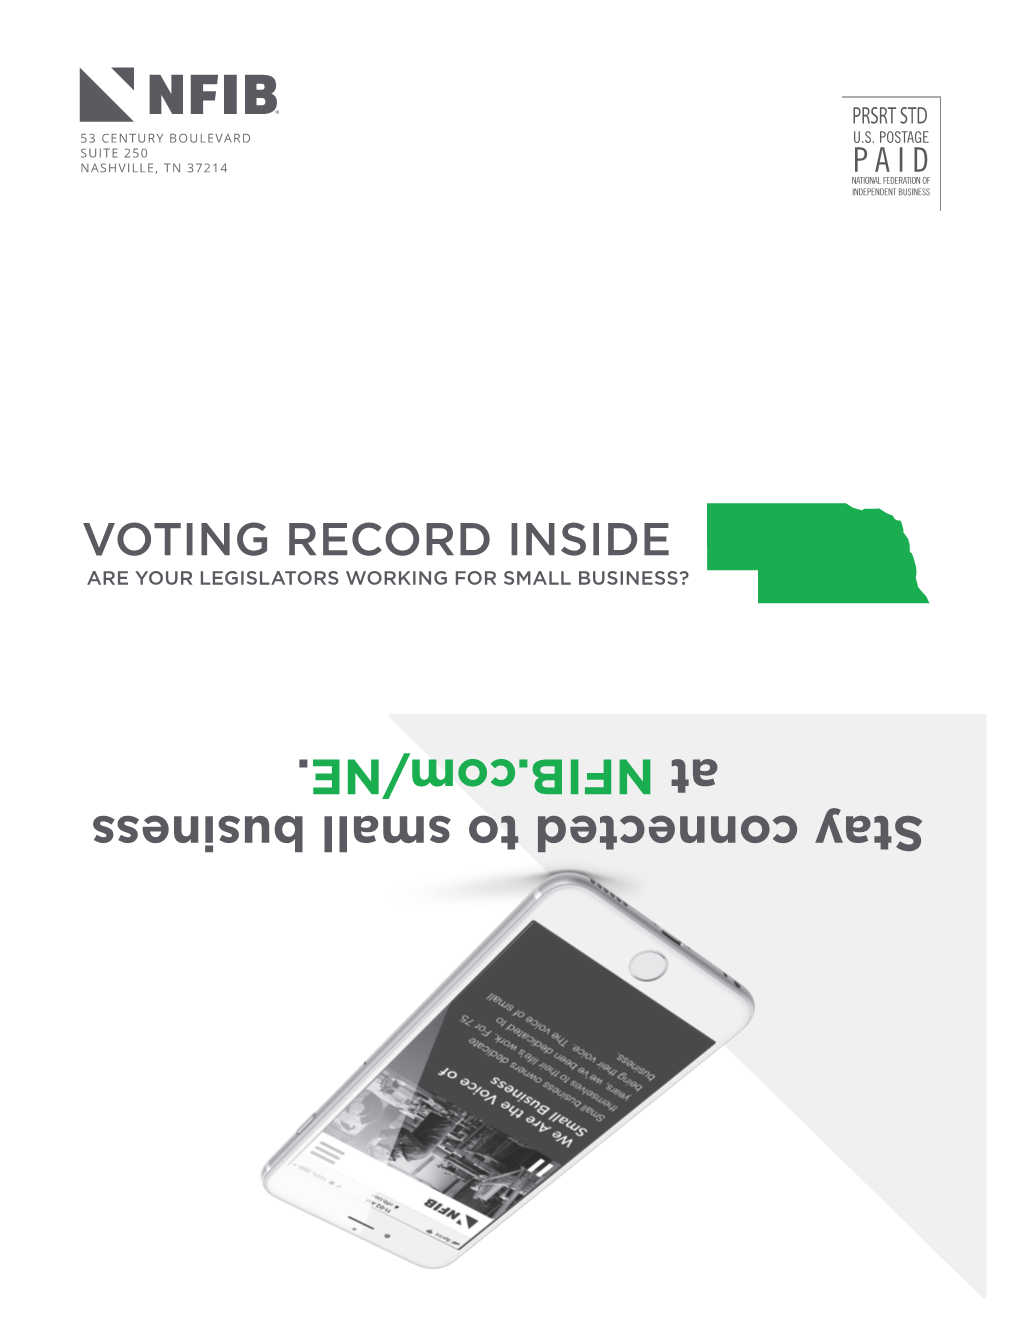 Download the Voting Record